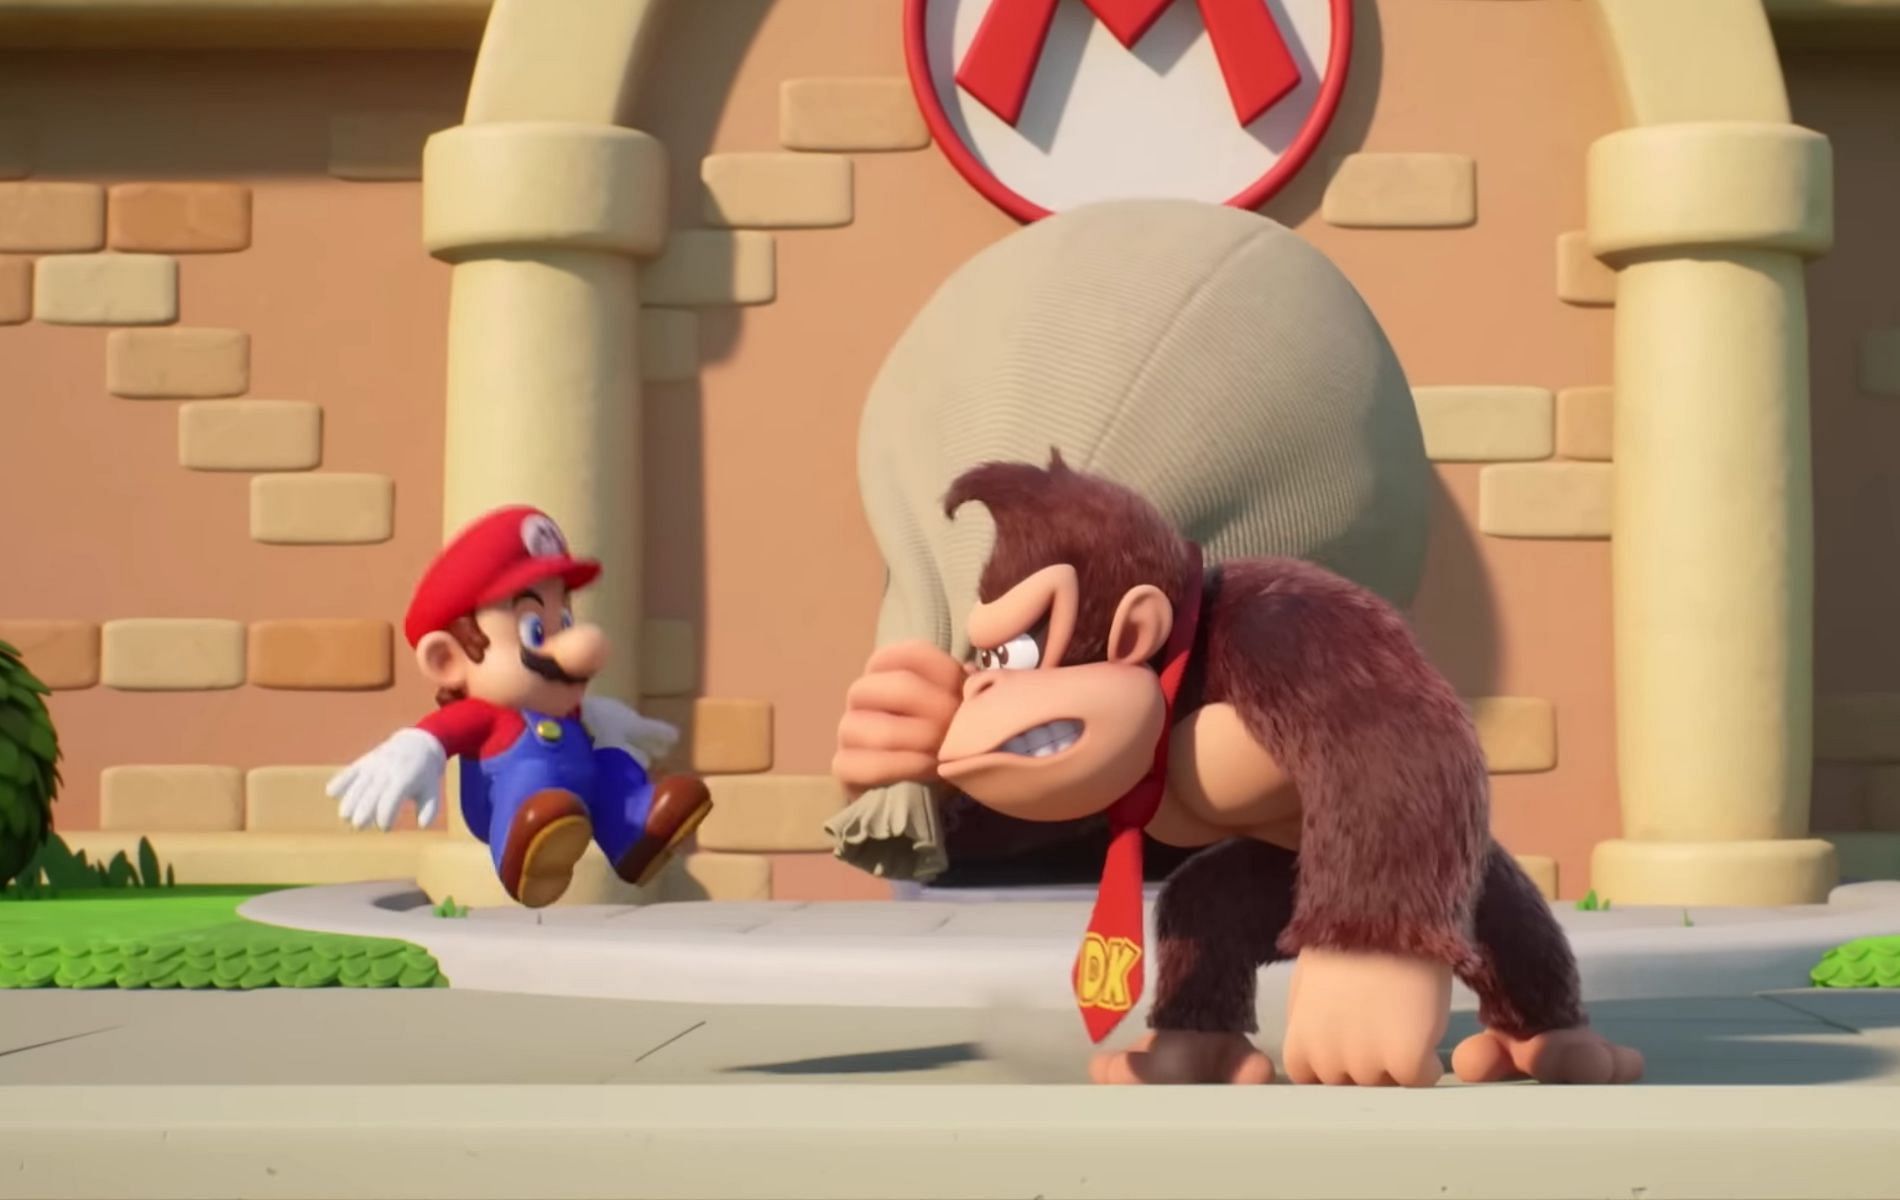 Is A New Donkey Kong Game Coming To Nintendo Switch - Gameranx